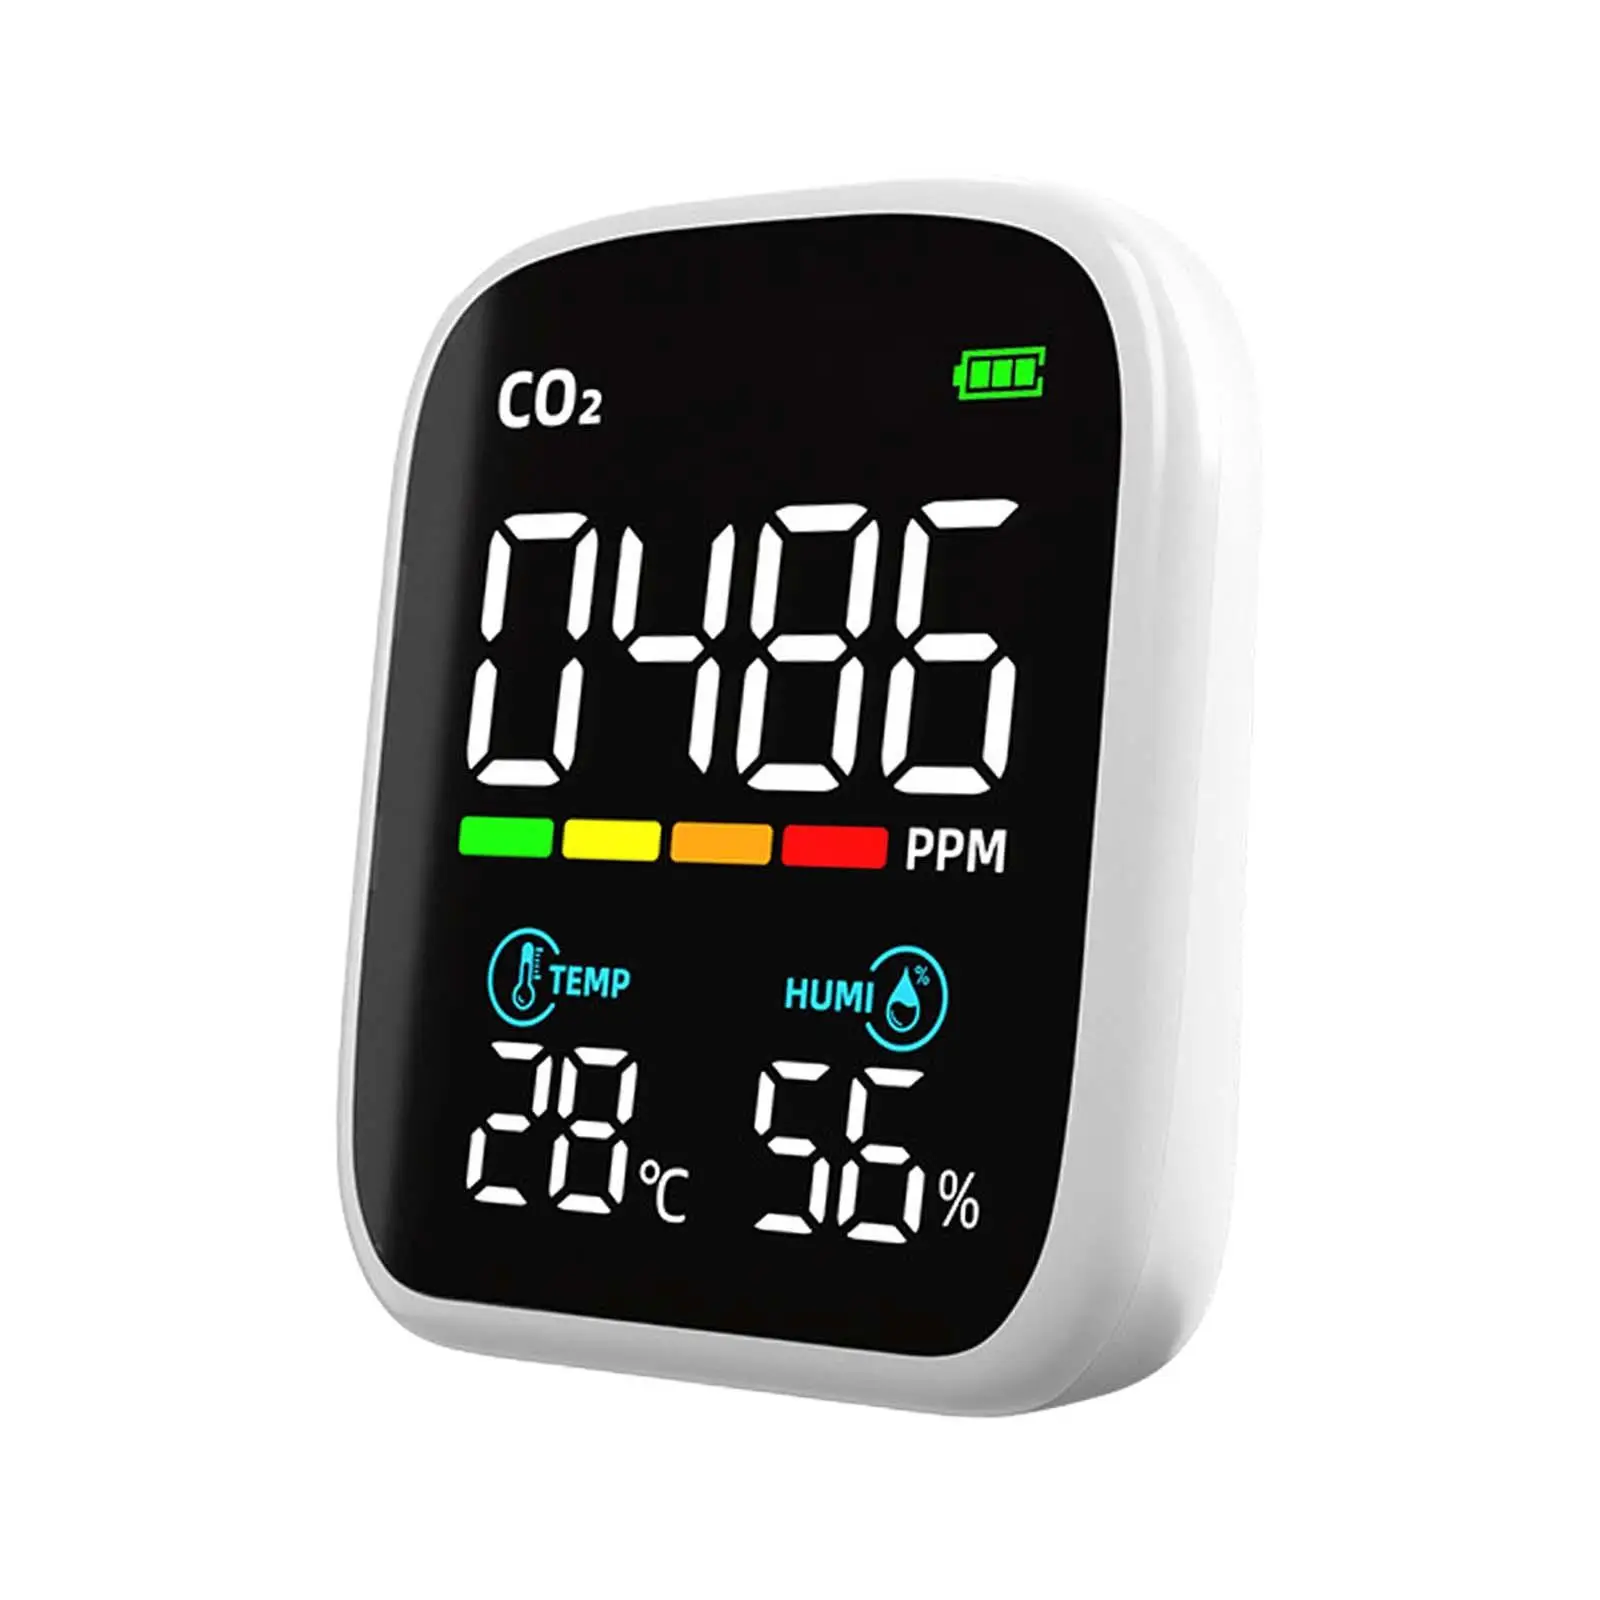 CO2 Digital Monitor Tester Meter Monitor Large Screen Air Quality Analyzer Monitor for Travel Hotel